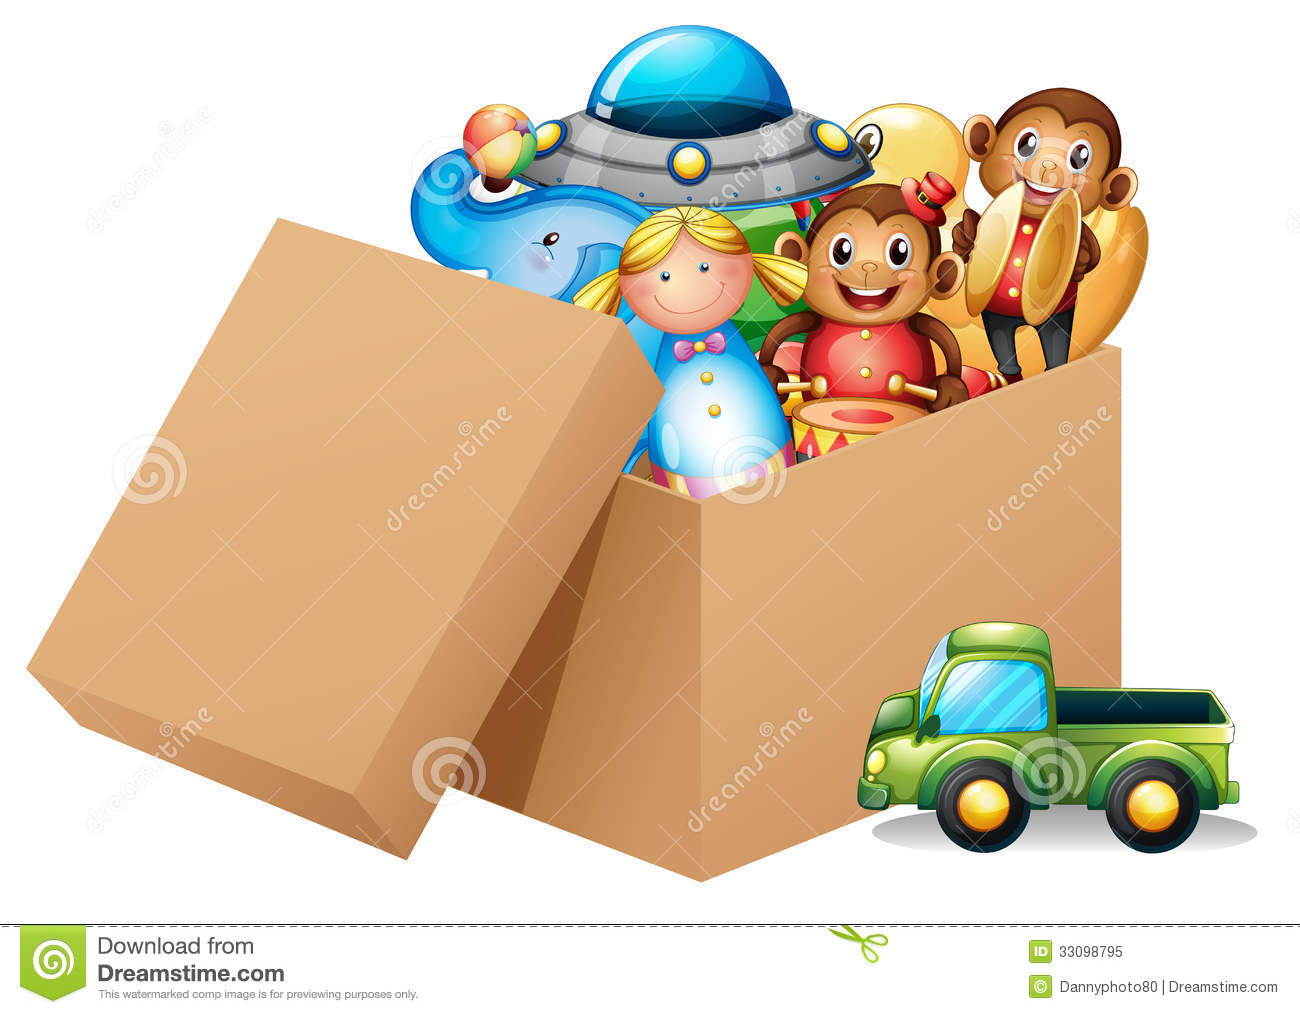 Illustration Of A Box Full Of Different Toys On A White Background